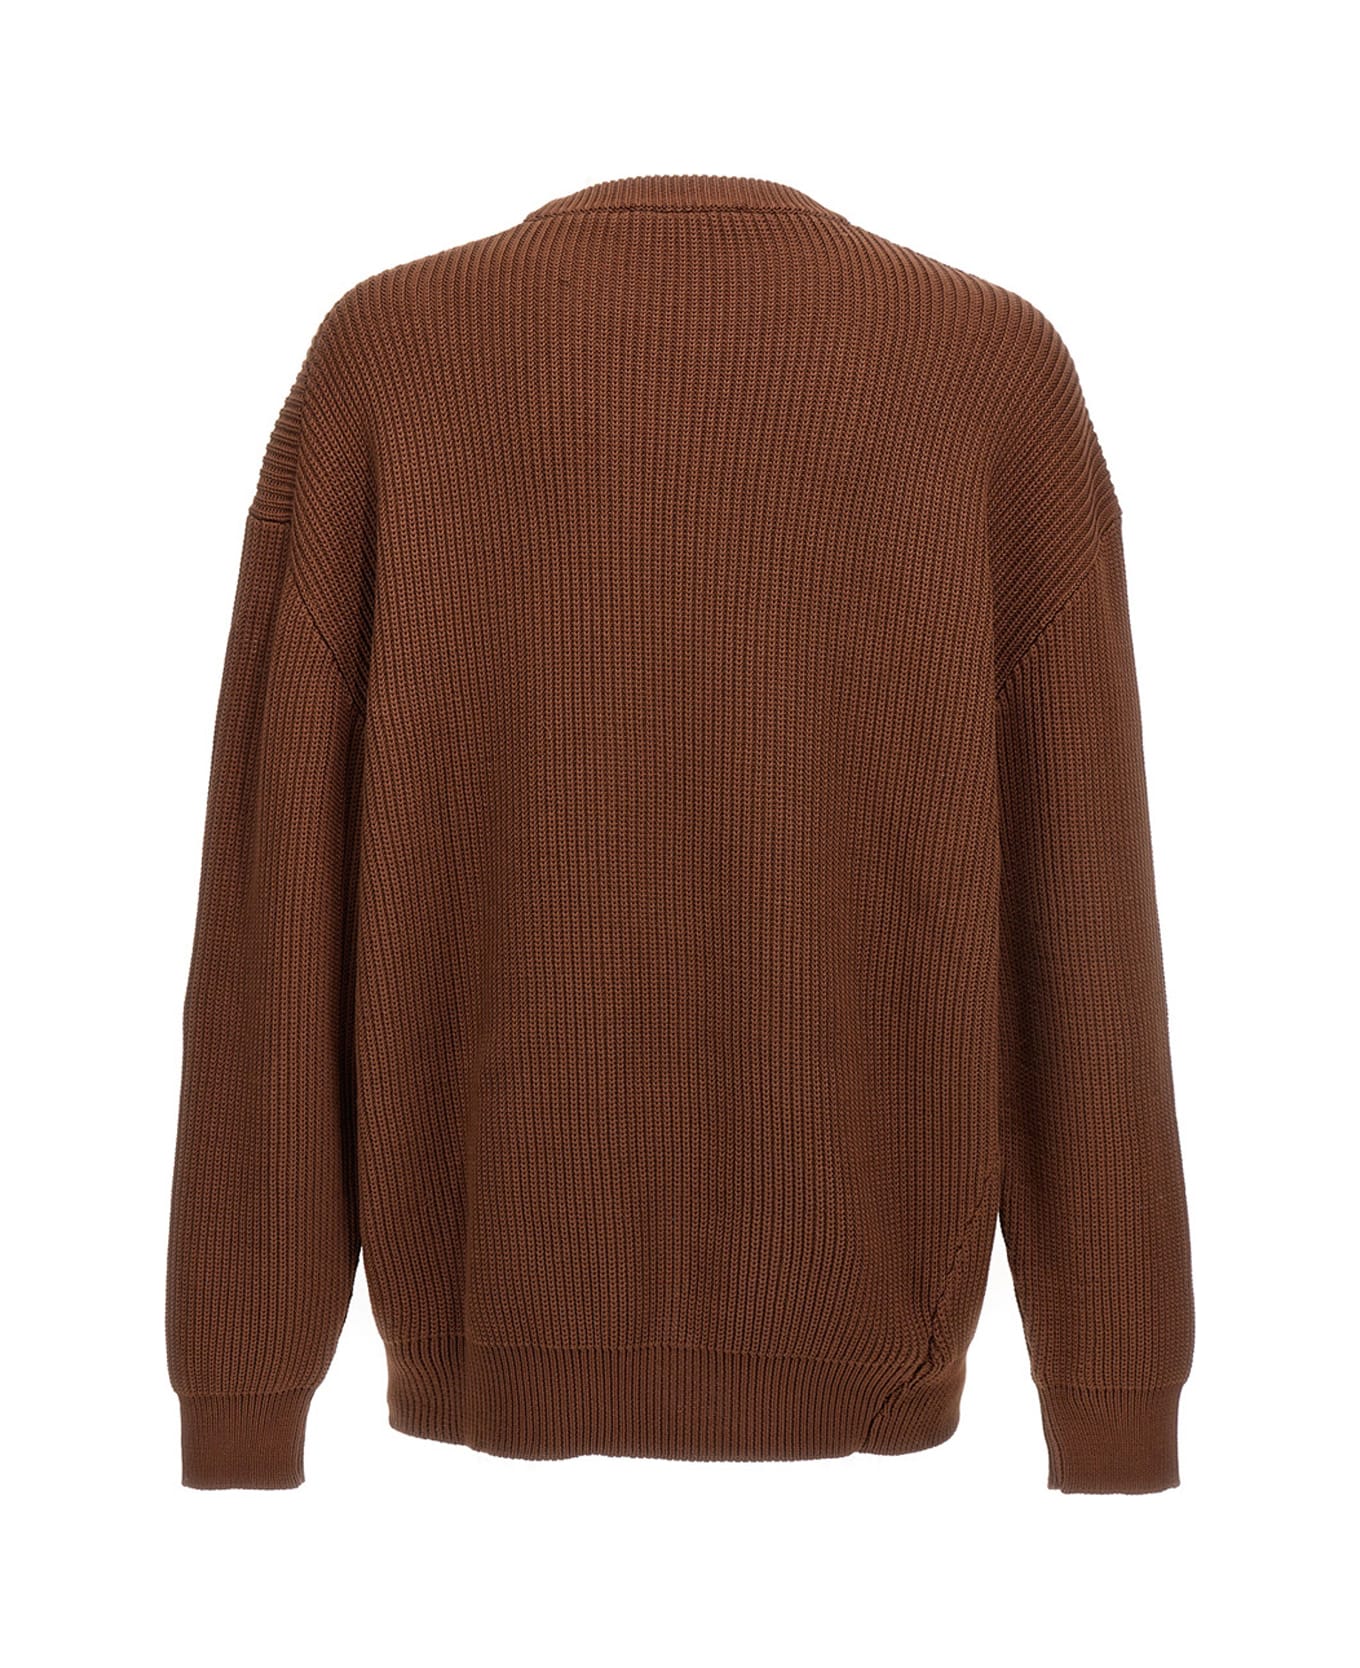 Hed Mayner 'twisted' Sweater - Brown ニットウェア